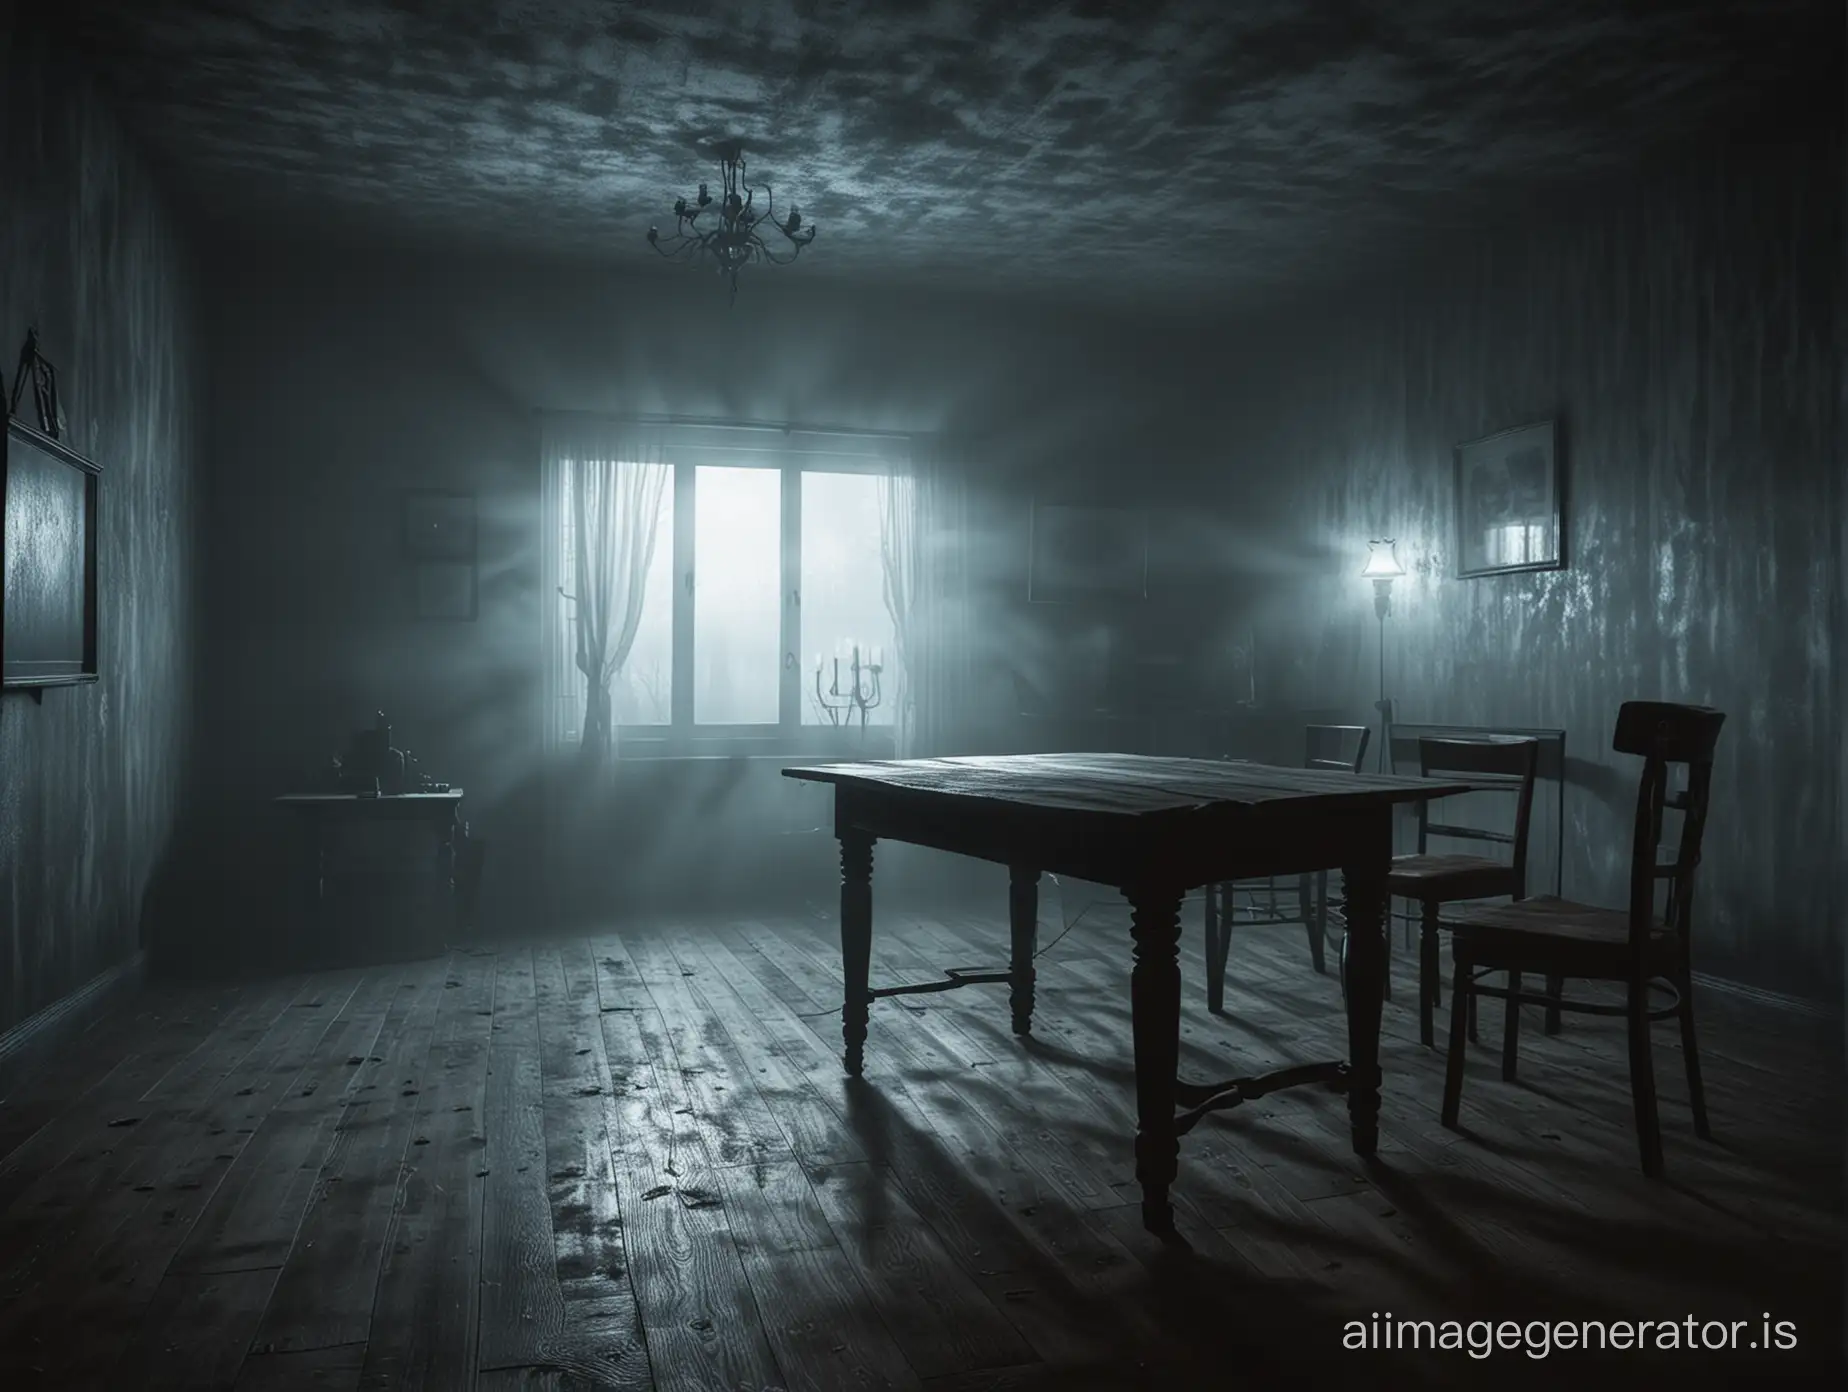 horror atmosphere, fog, night, room with table, powerful computer, evil shadows